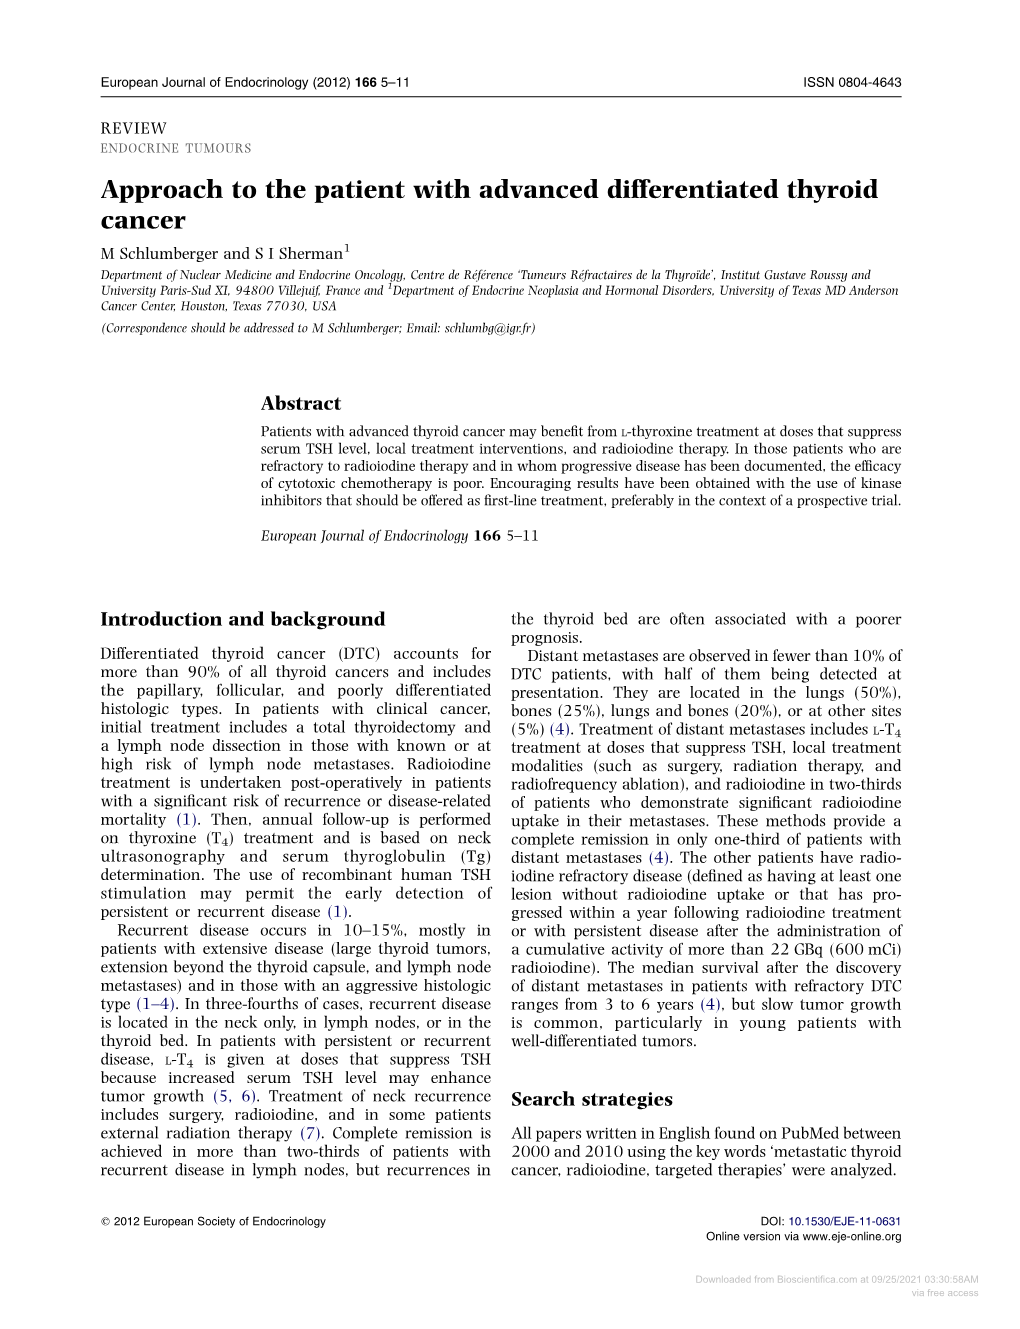 Approach to the Patient with Advanced Differentiated Thyroid Cancer